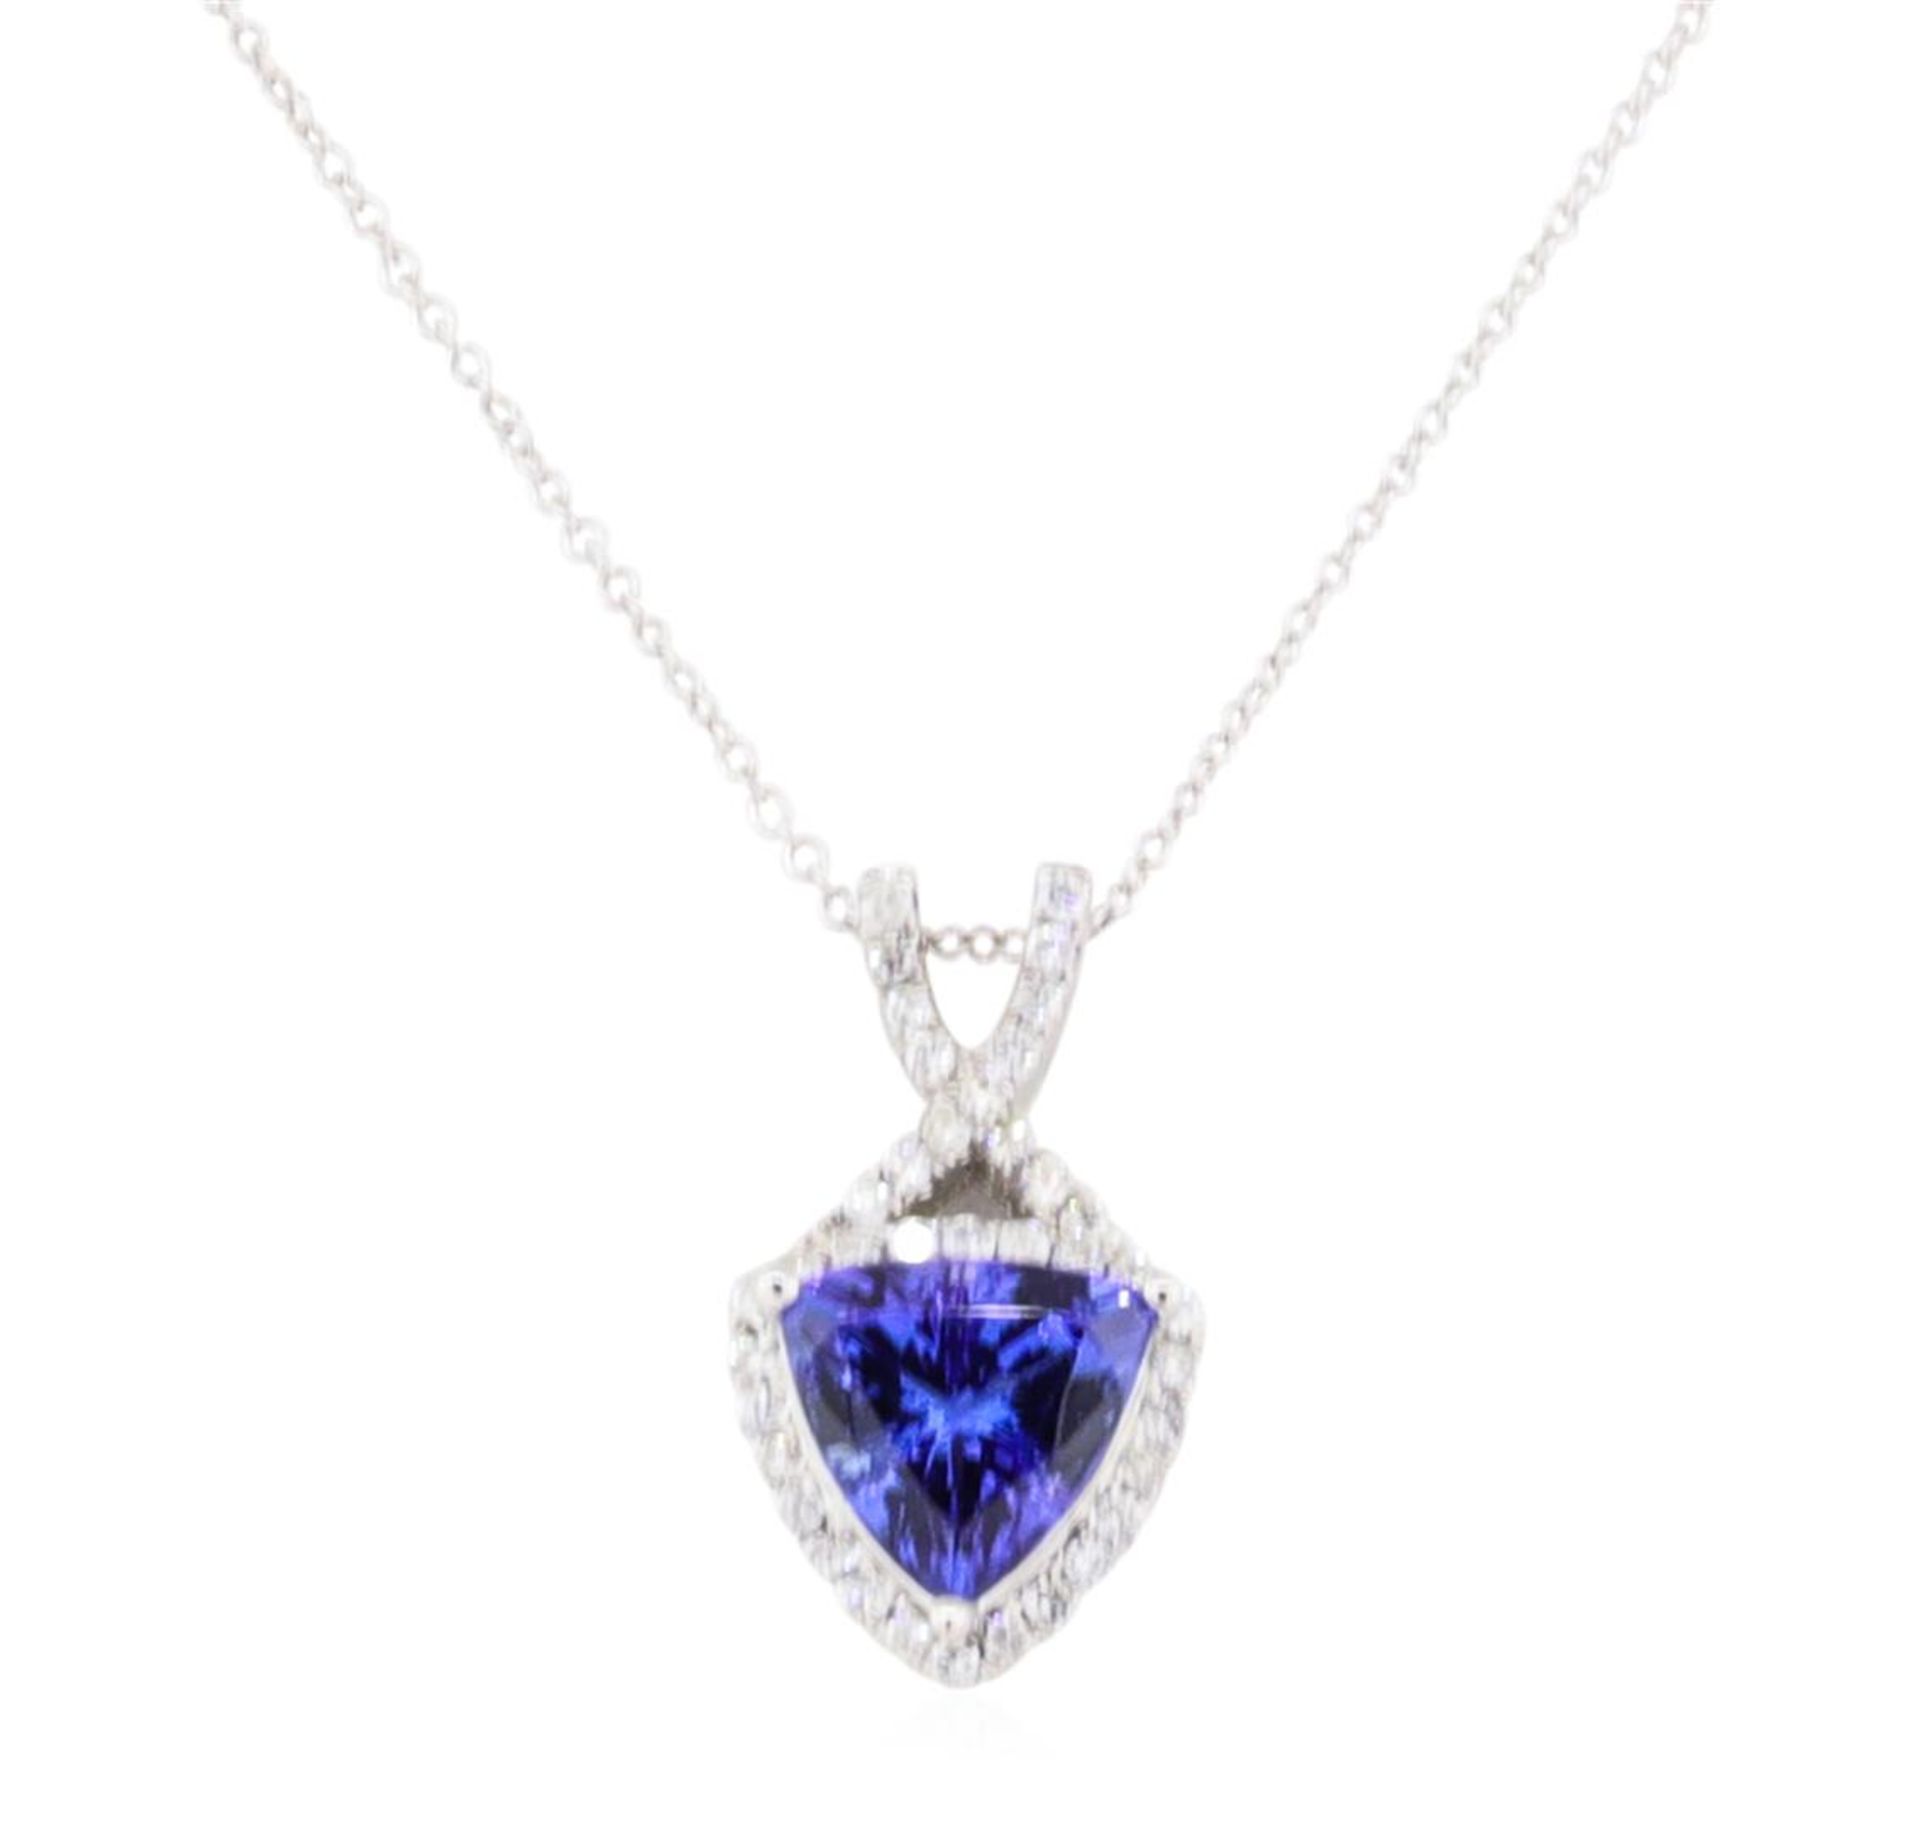 1.48ctw Tanzanite and Diamond Pendant With Chain - 14KT White Gold - Image 2 of 2